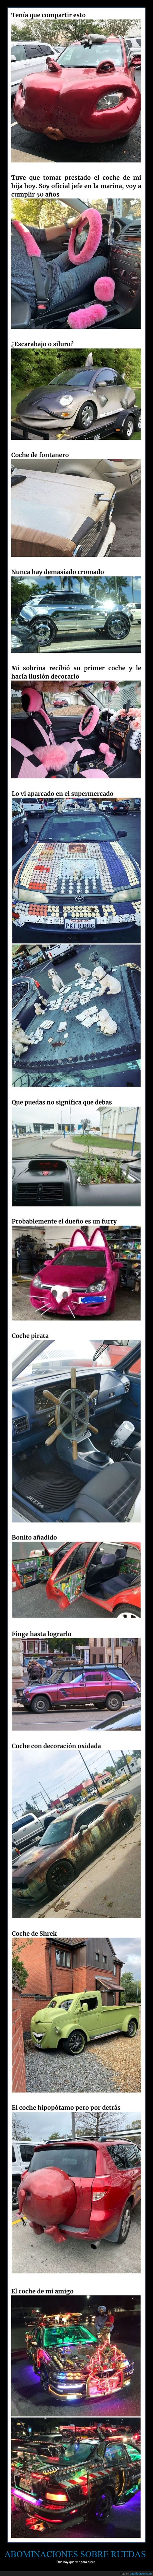 coches,wtf